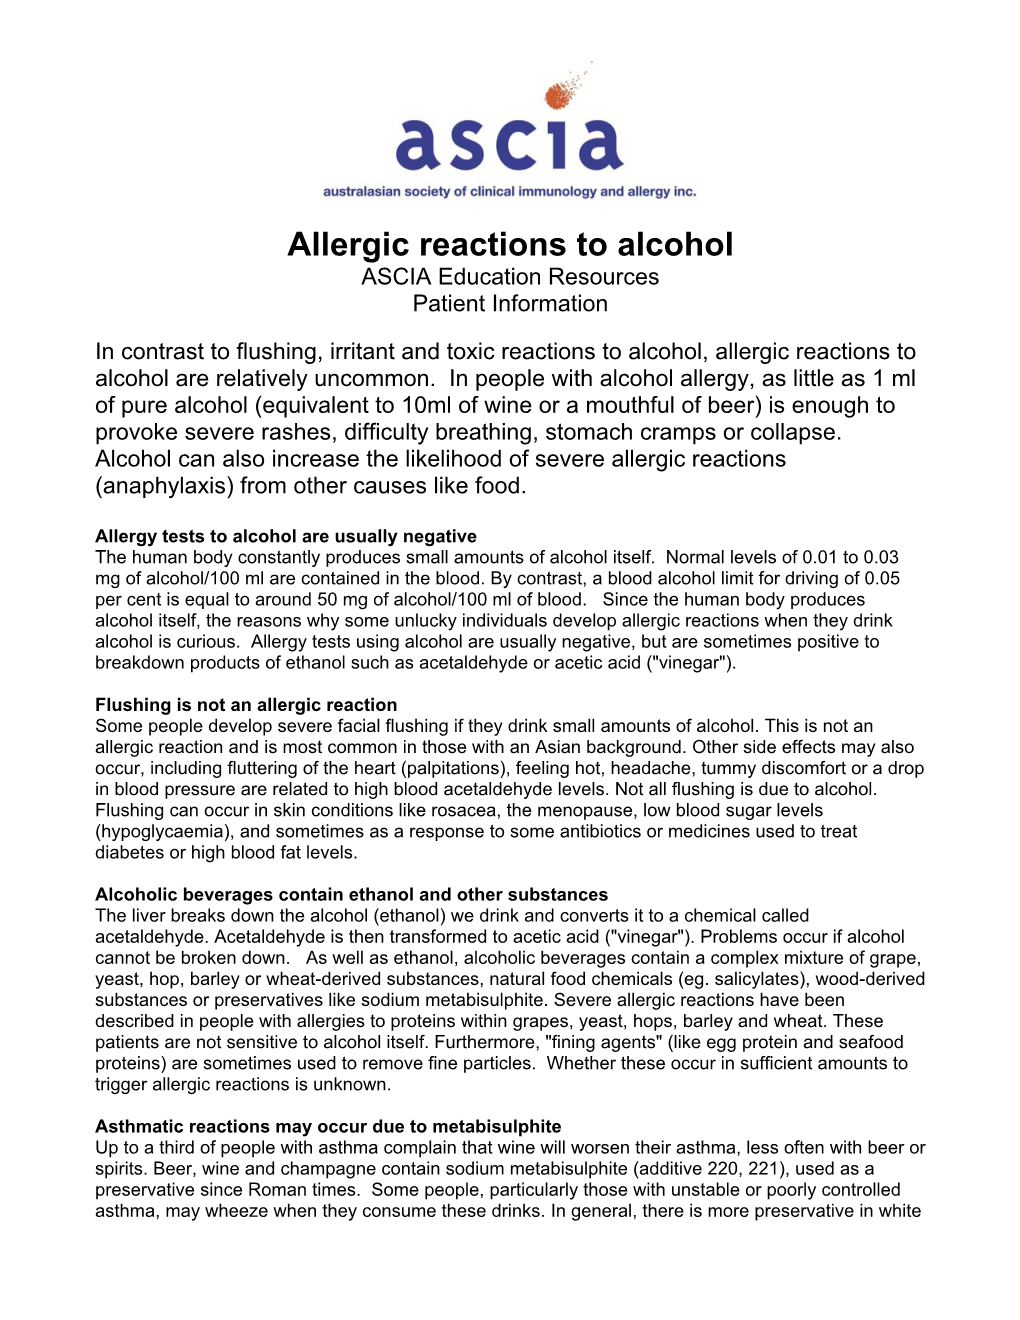 Allergic Reactions to Alcohol ASCIA Education Resources Patient Information